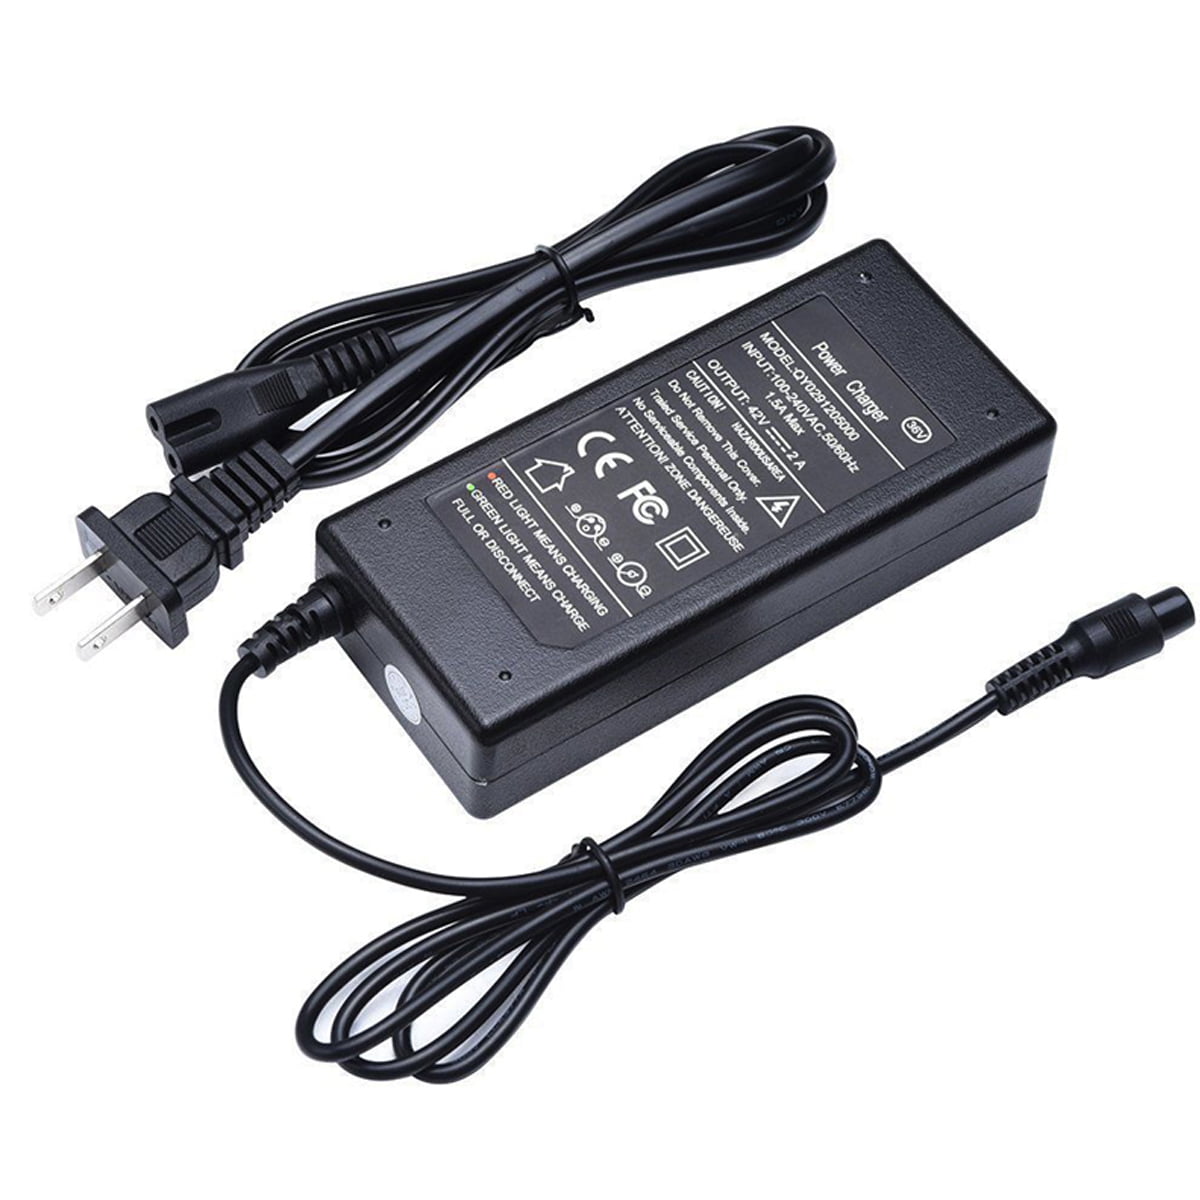 2A 42V Charger Adapter for Electric Smart Self Balancing Scooter Hoverboard USA 